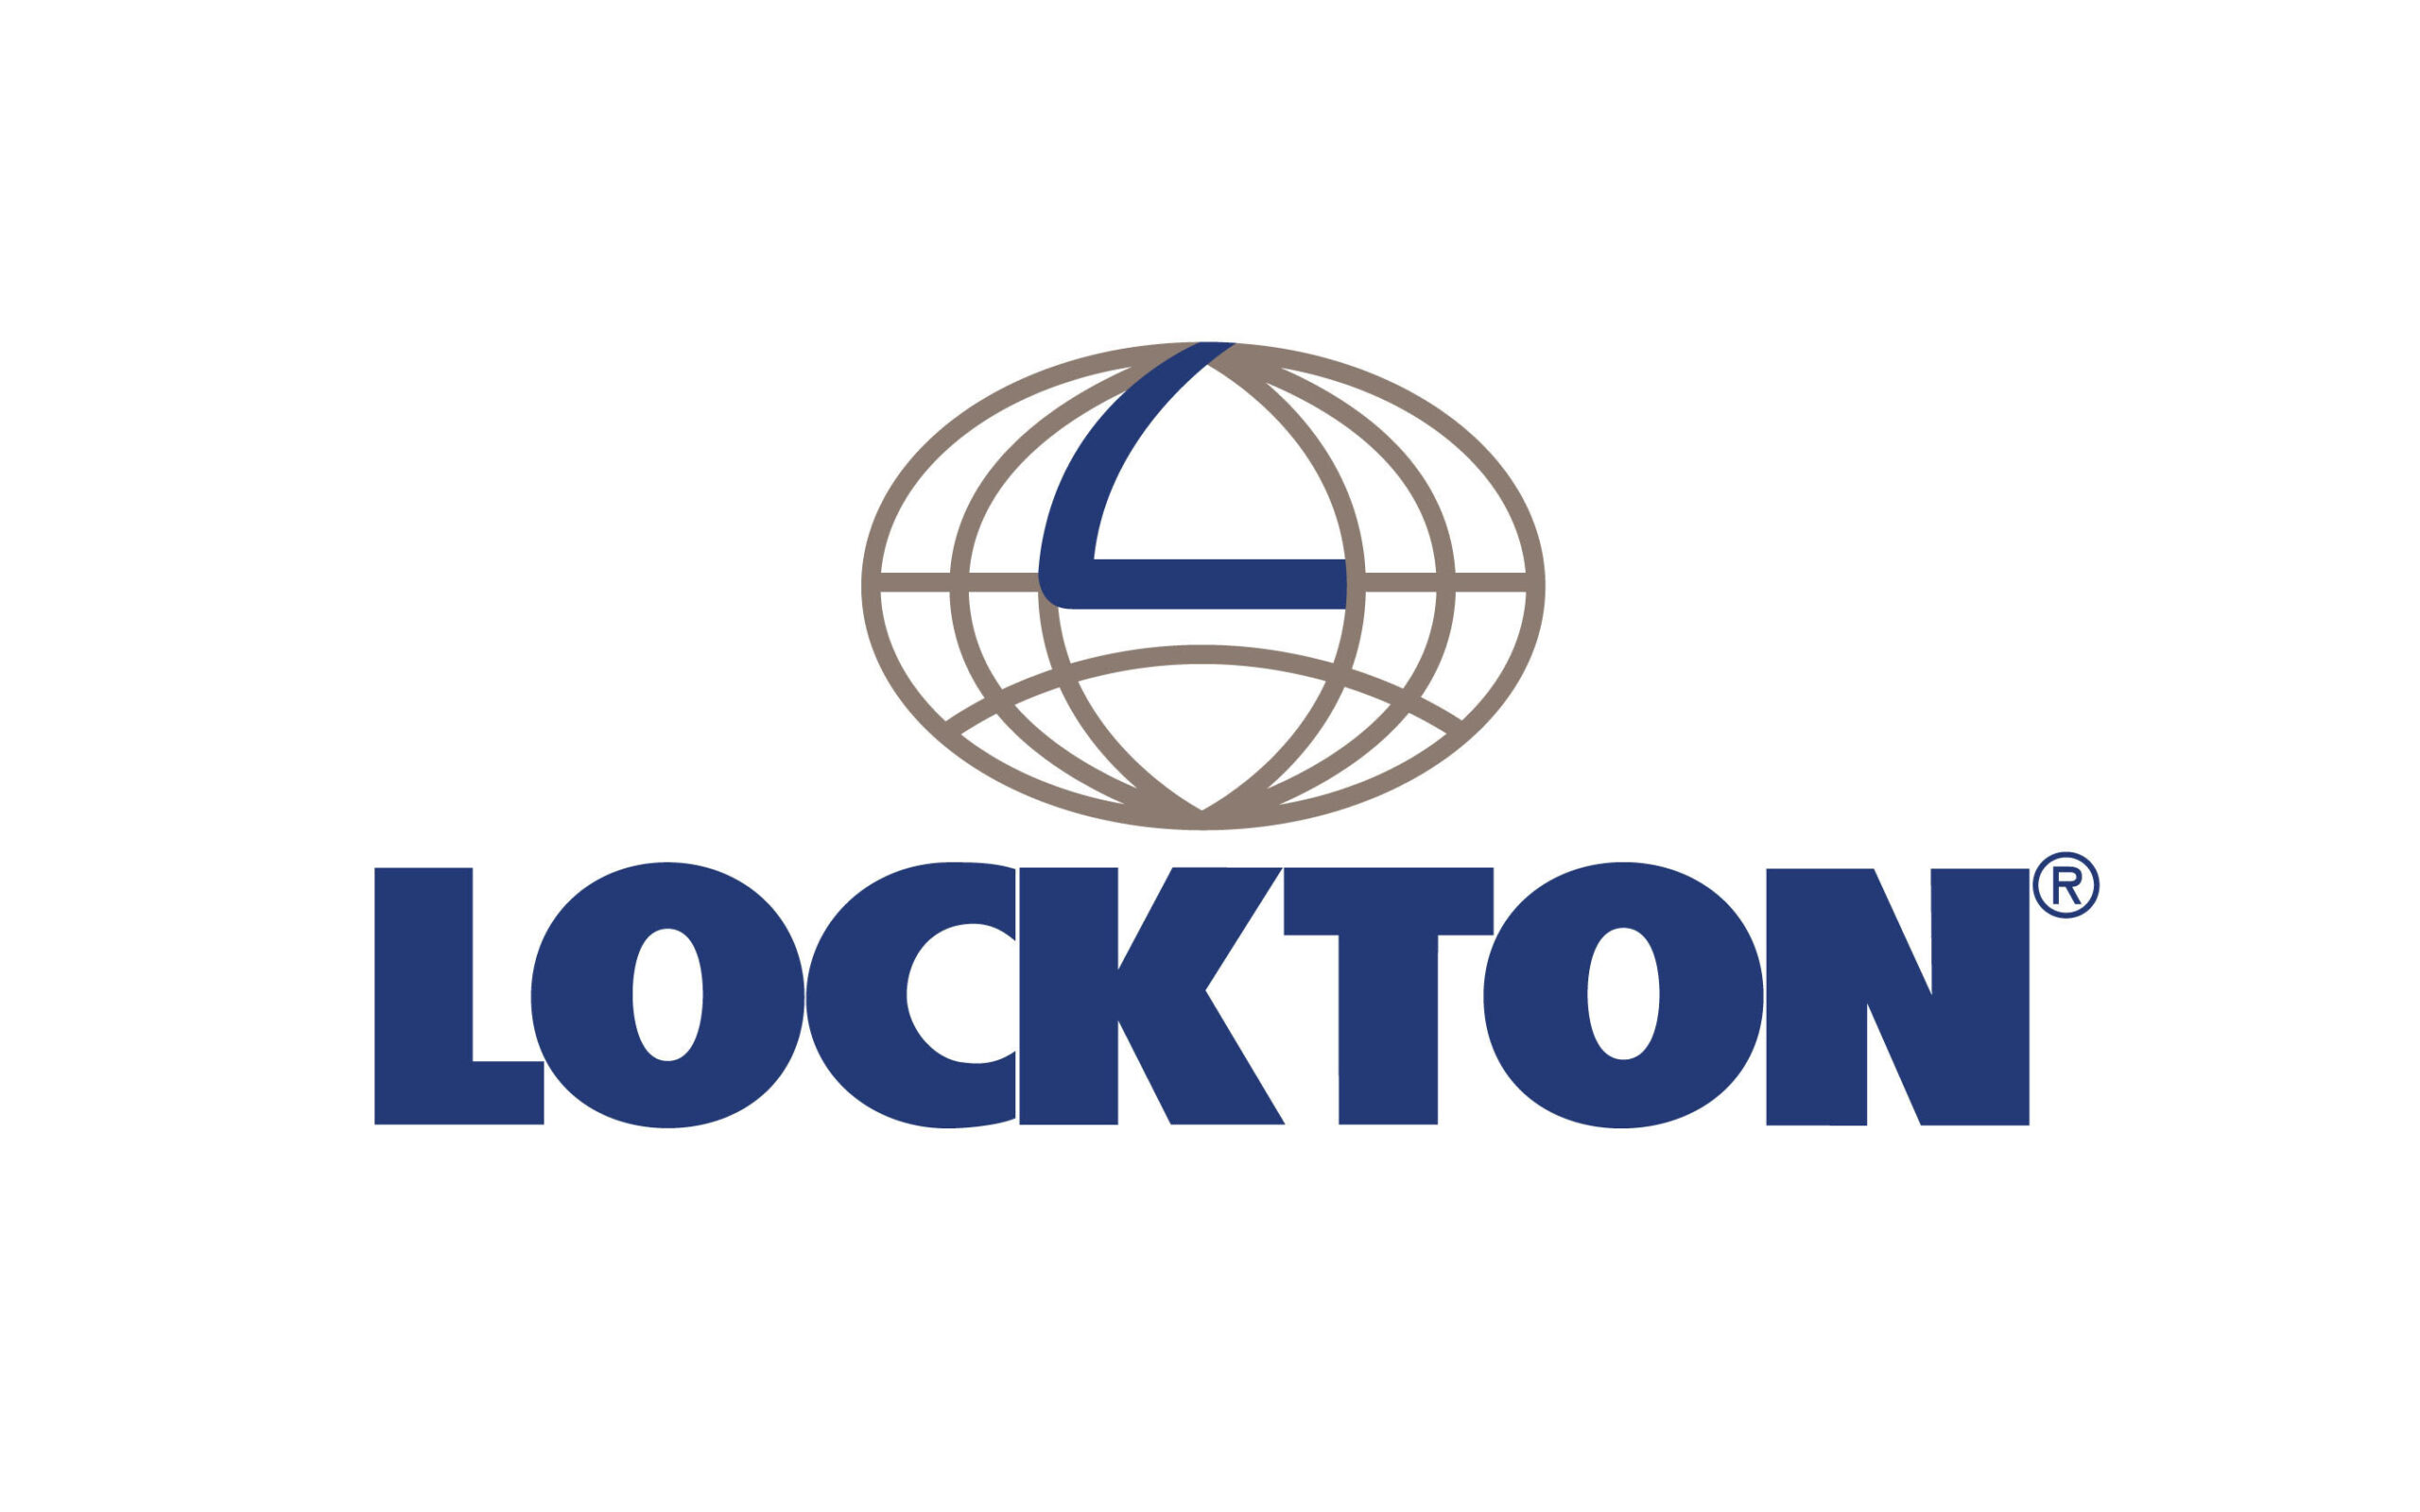 Alt-text: "Logo of Lockton with a stylized globe and a swoosh forming a partial 'L' above the company name in capital letters, in shades of blue and brown, with a registered trademark symbol.